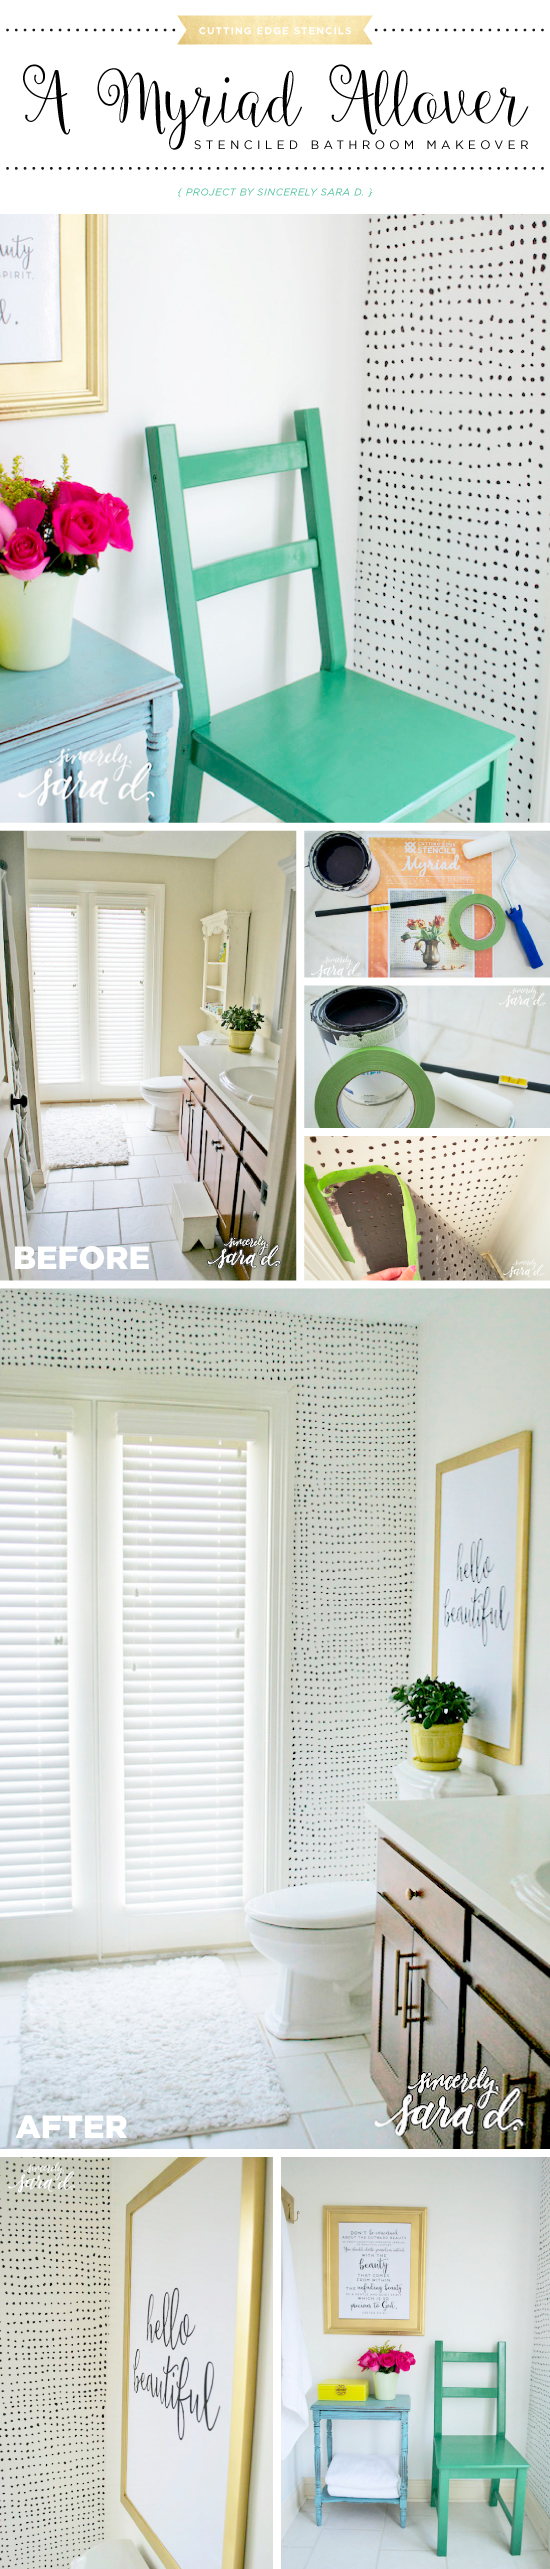 Cutting Edge Stencils shares a DIY stenciled bathroom accent wall using the Myriad Allover stencil pattern in black and white. http://www.cuttingedgestencils.com/myriad-modern-wall-pattern-stencil.html